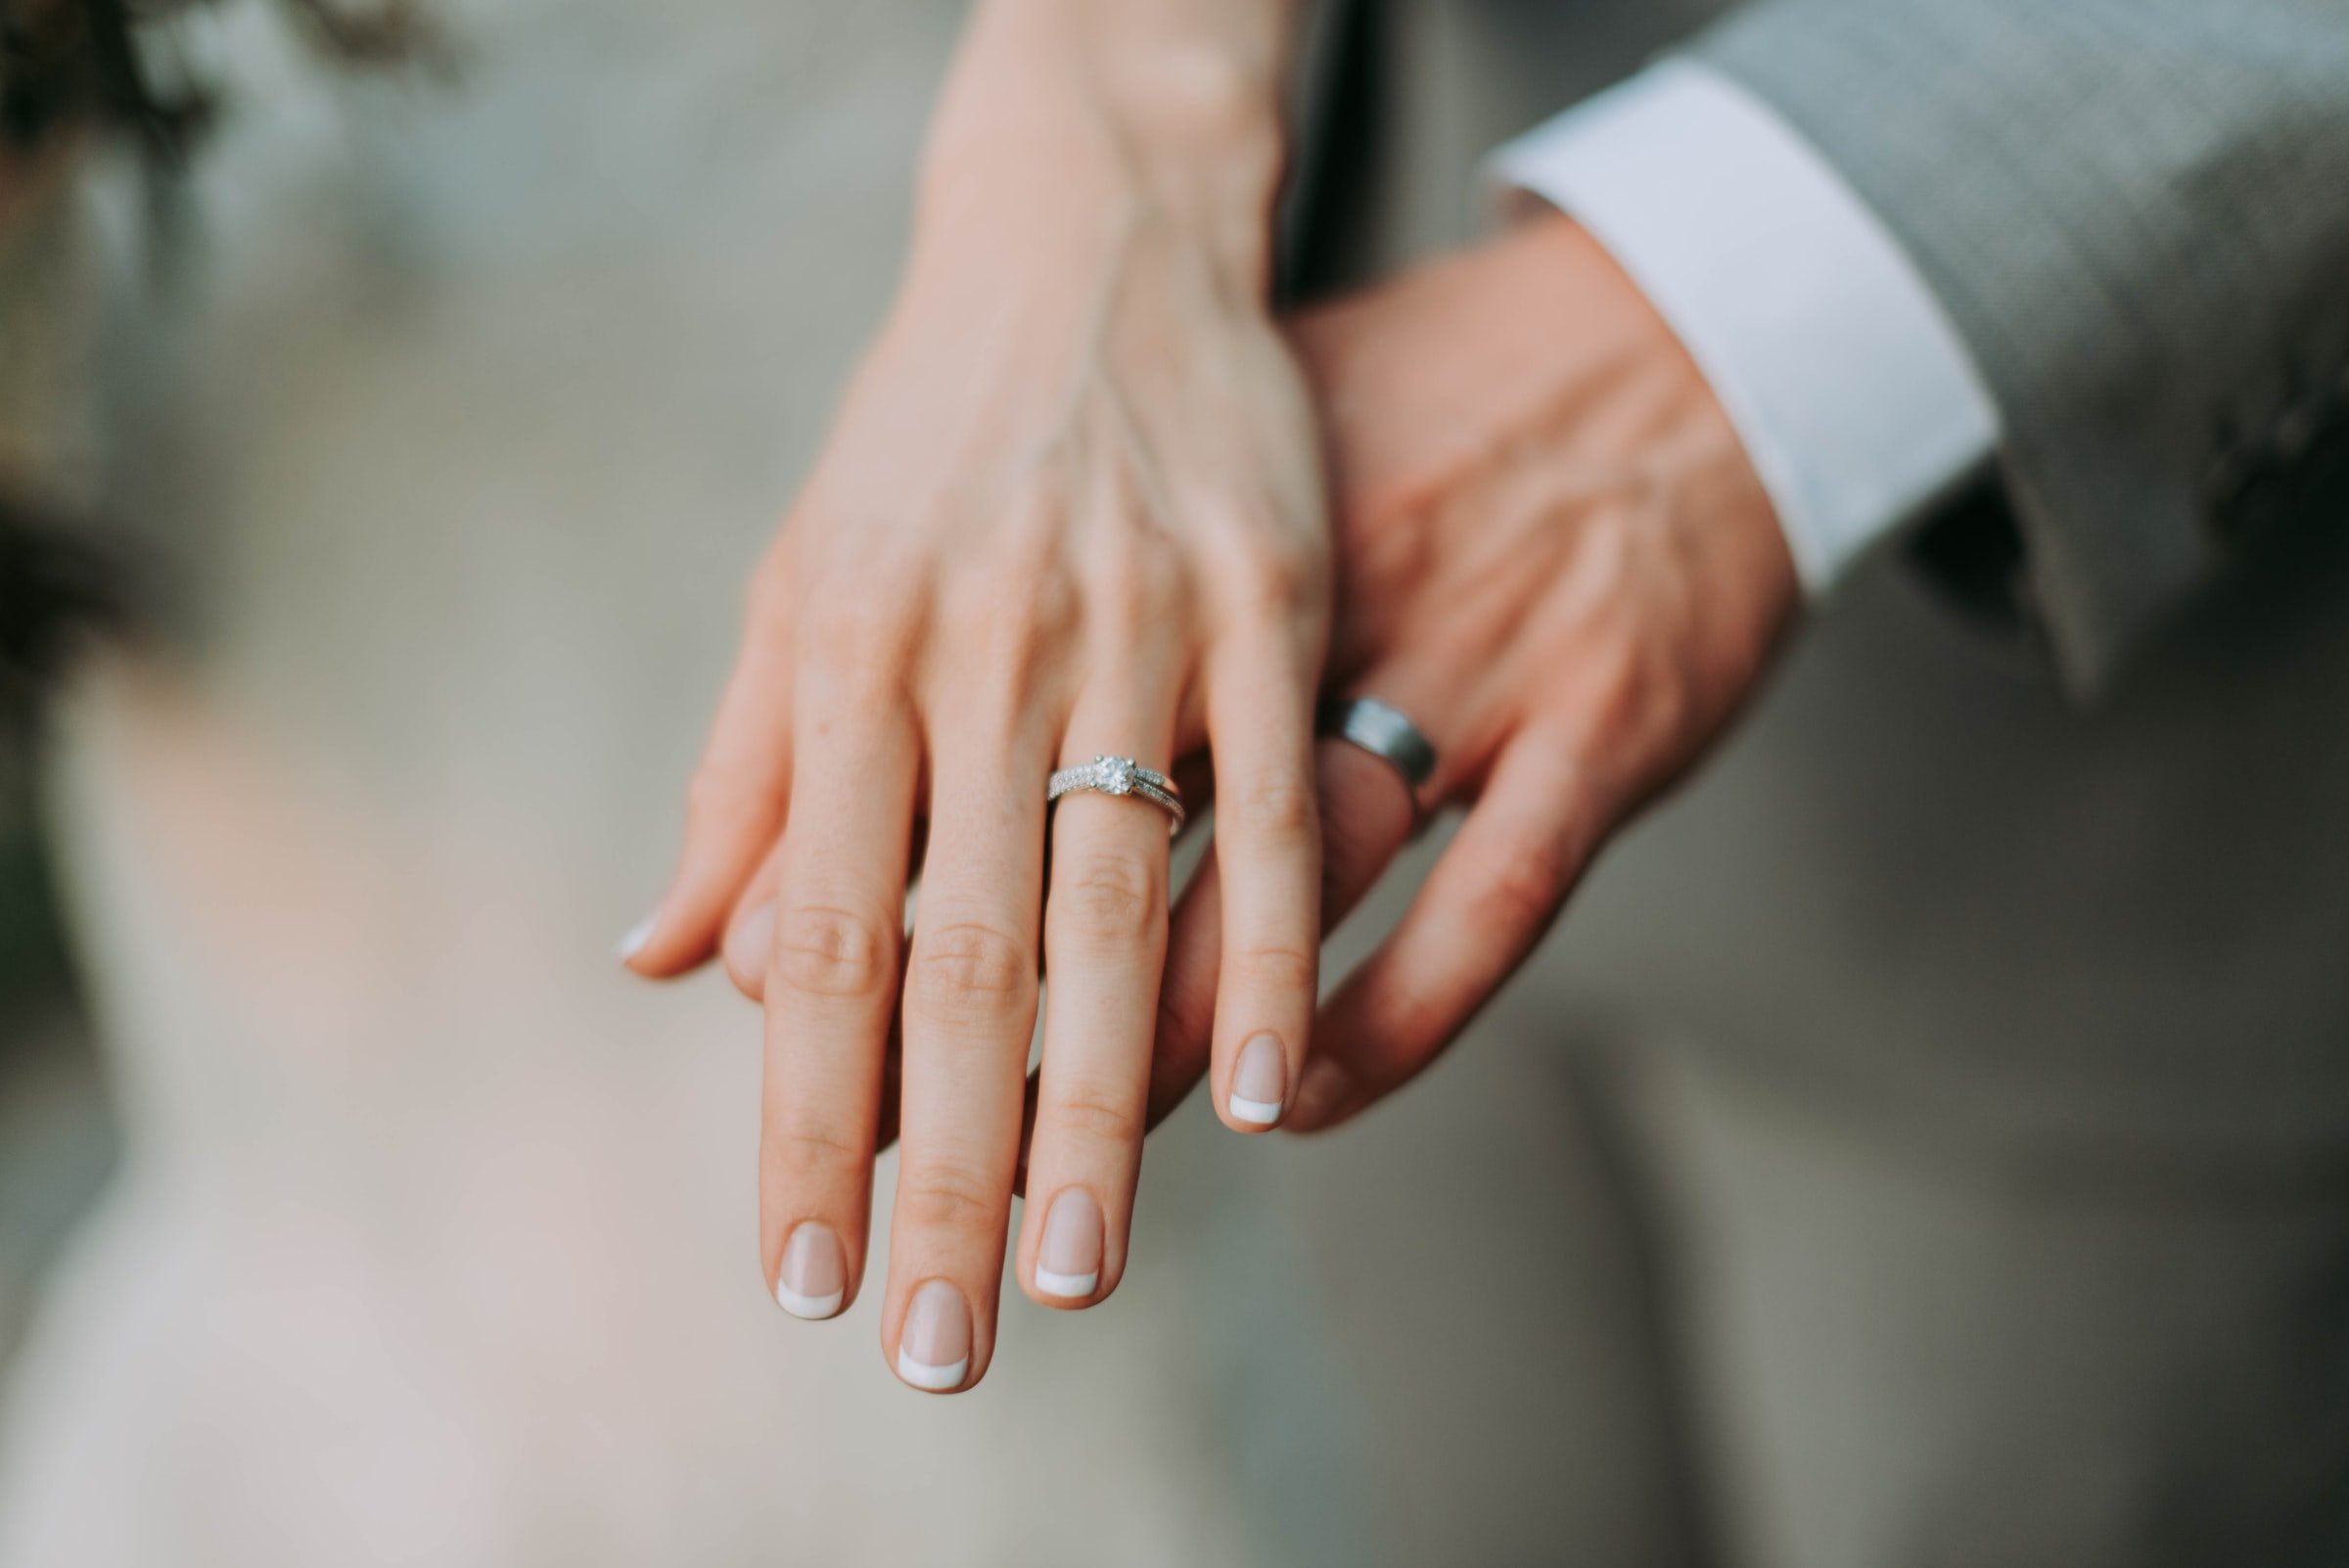 A couple is pictured showing their wedding rings. | Source: Unsplash